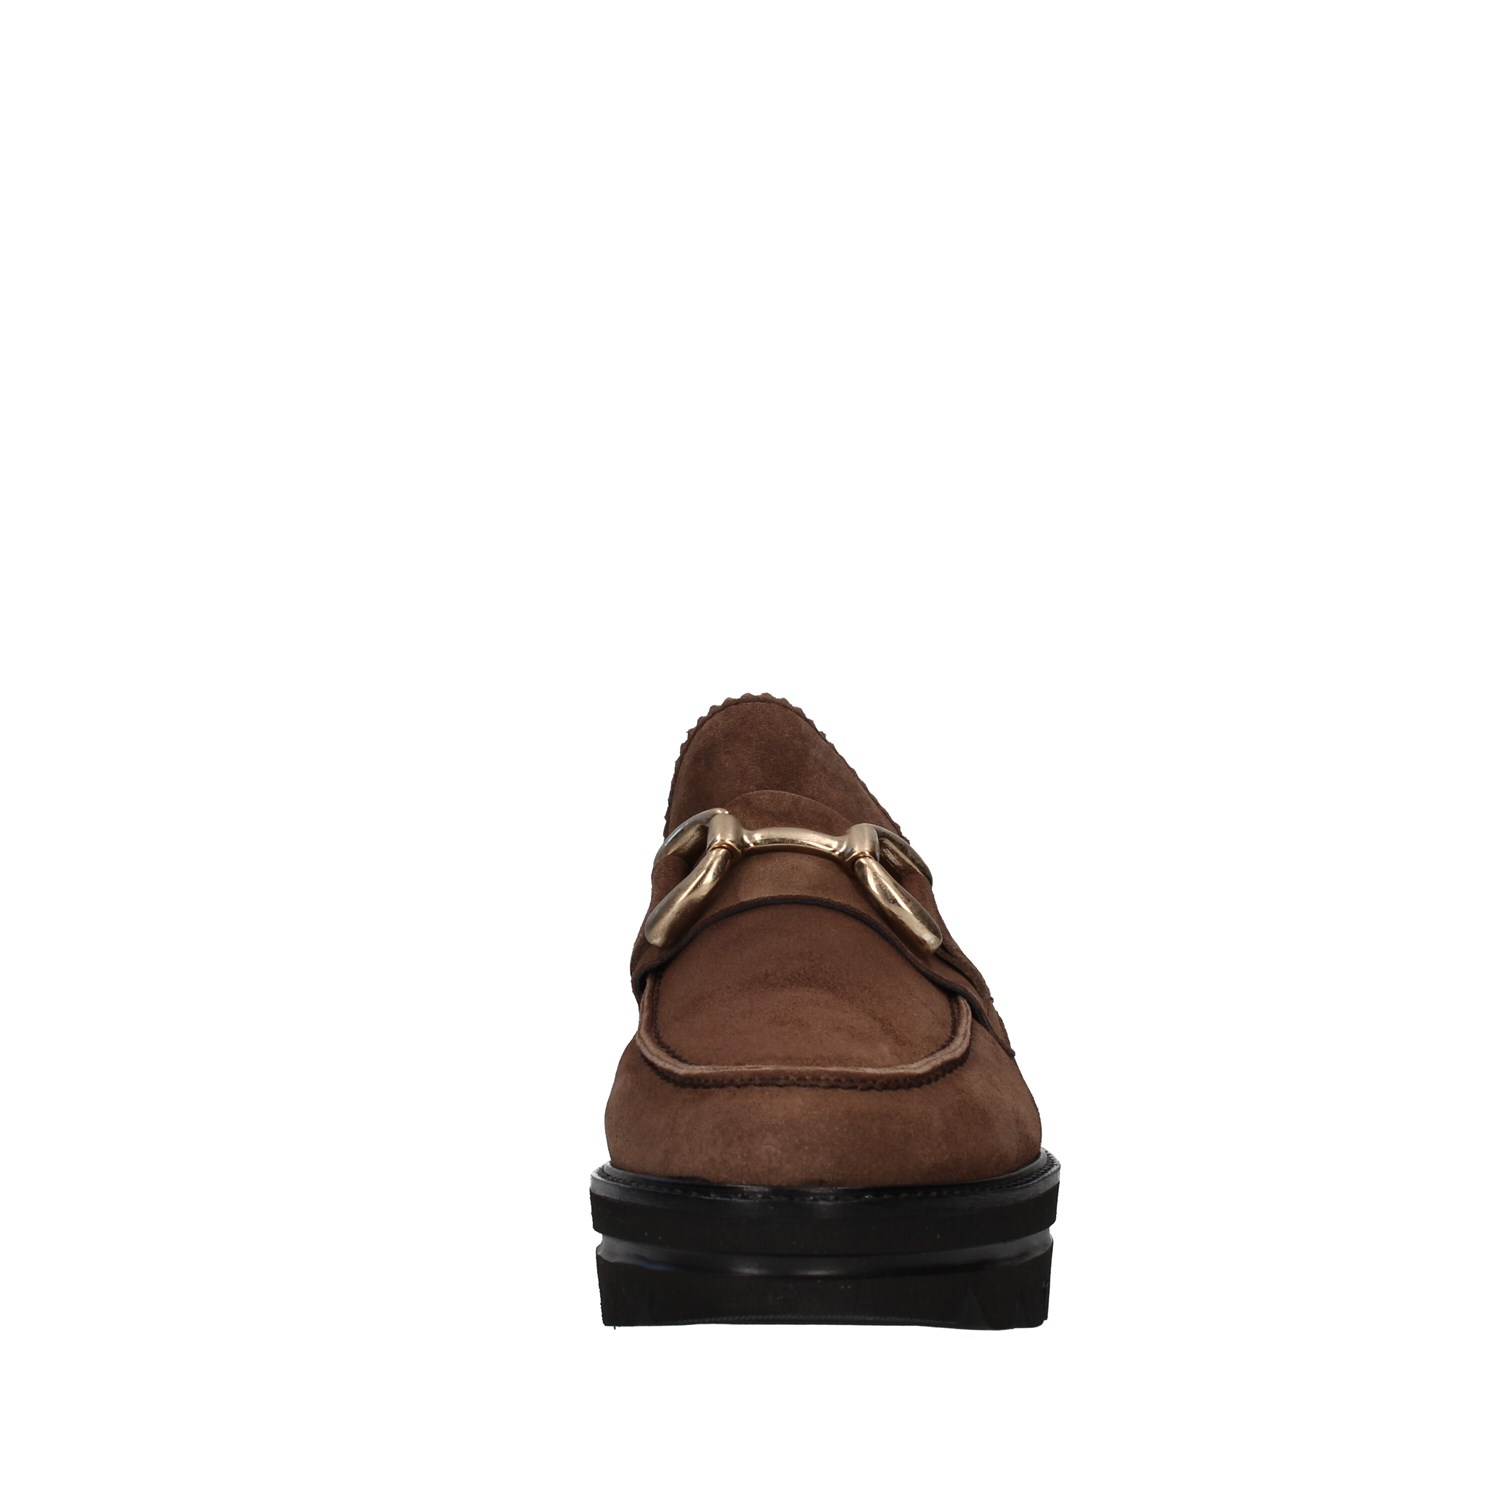 Callaghan Shoes Woman Loafers BROWN 14854